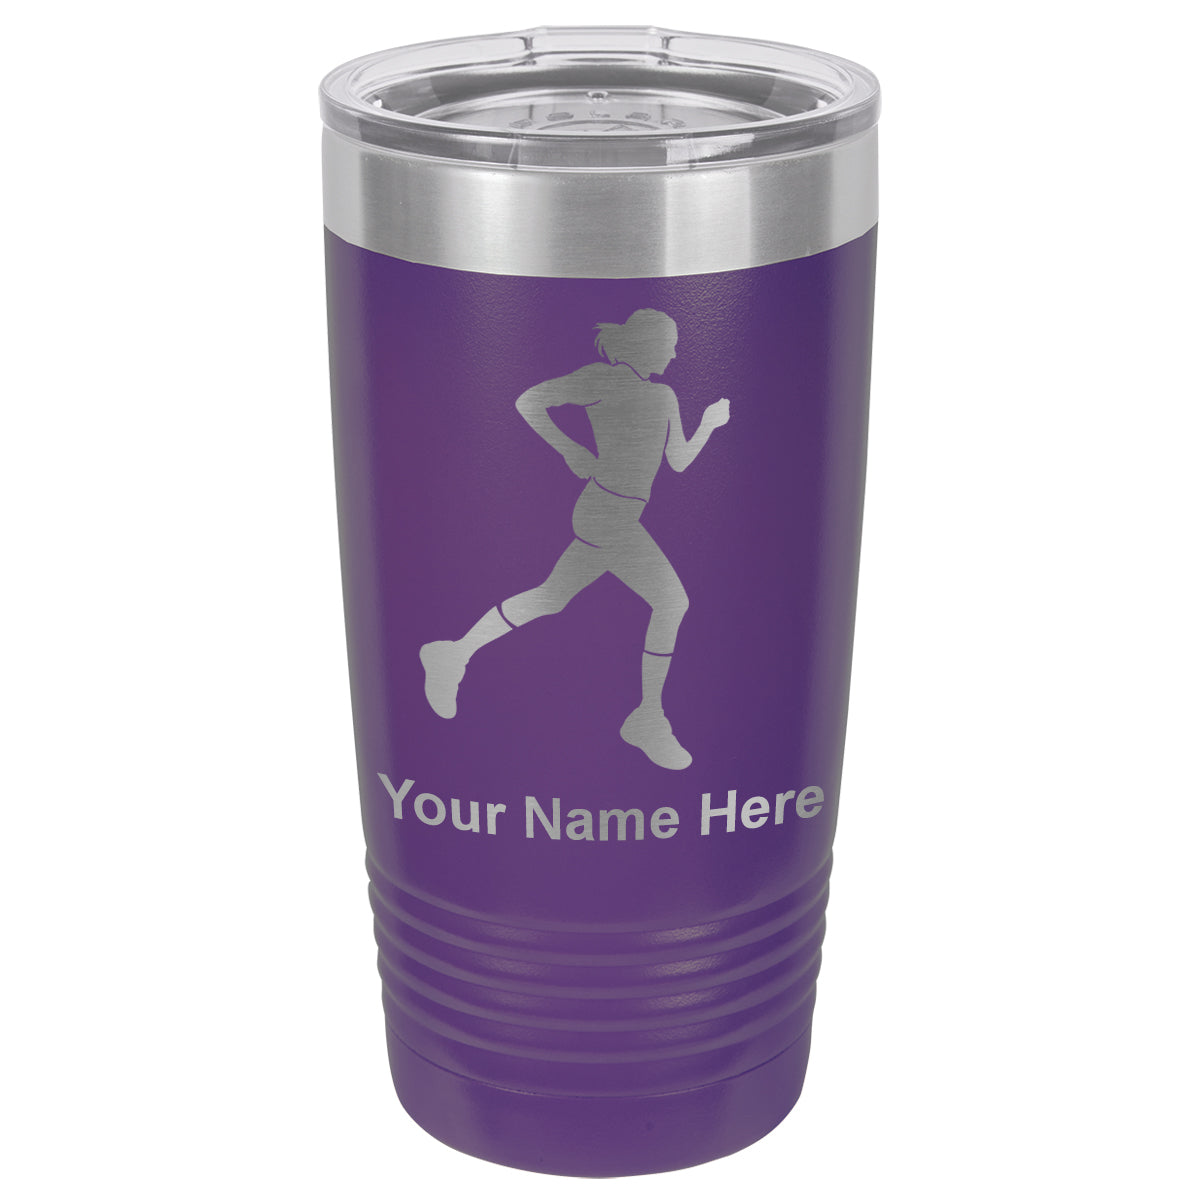 20oz Vacuum Insulated Tumbler Mug, Running Woman, Personalized Engraving Included